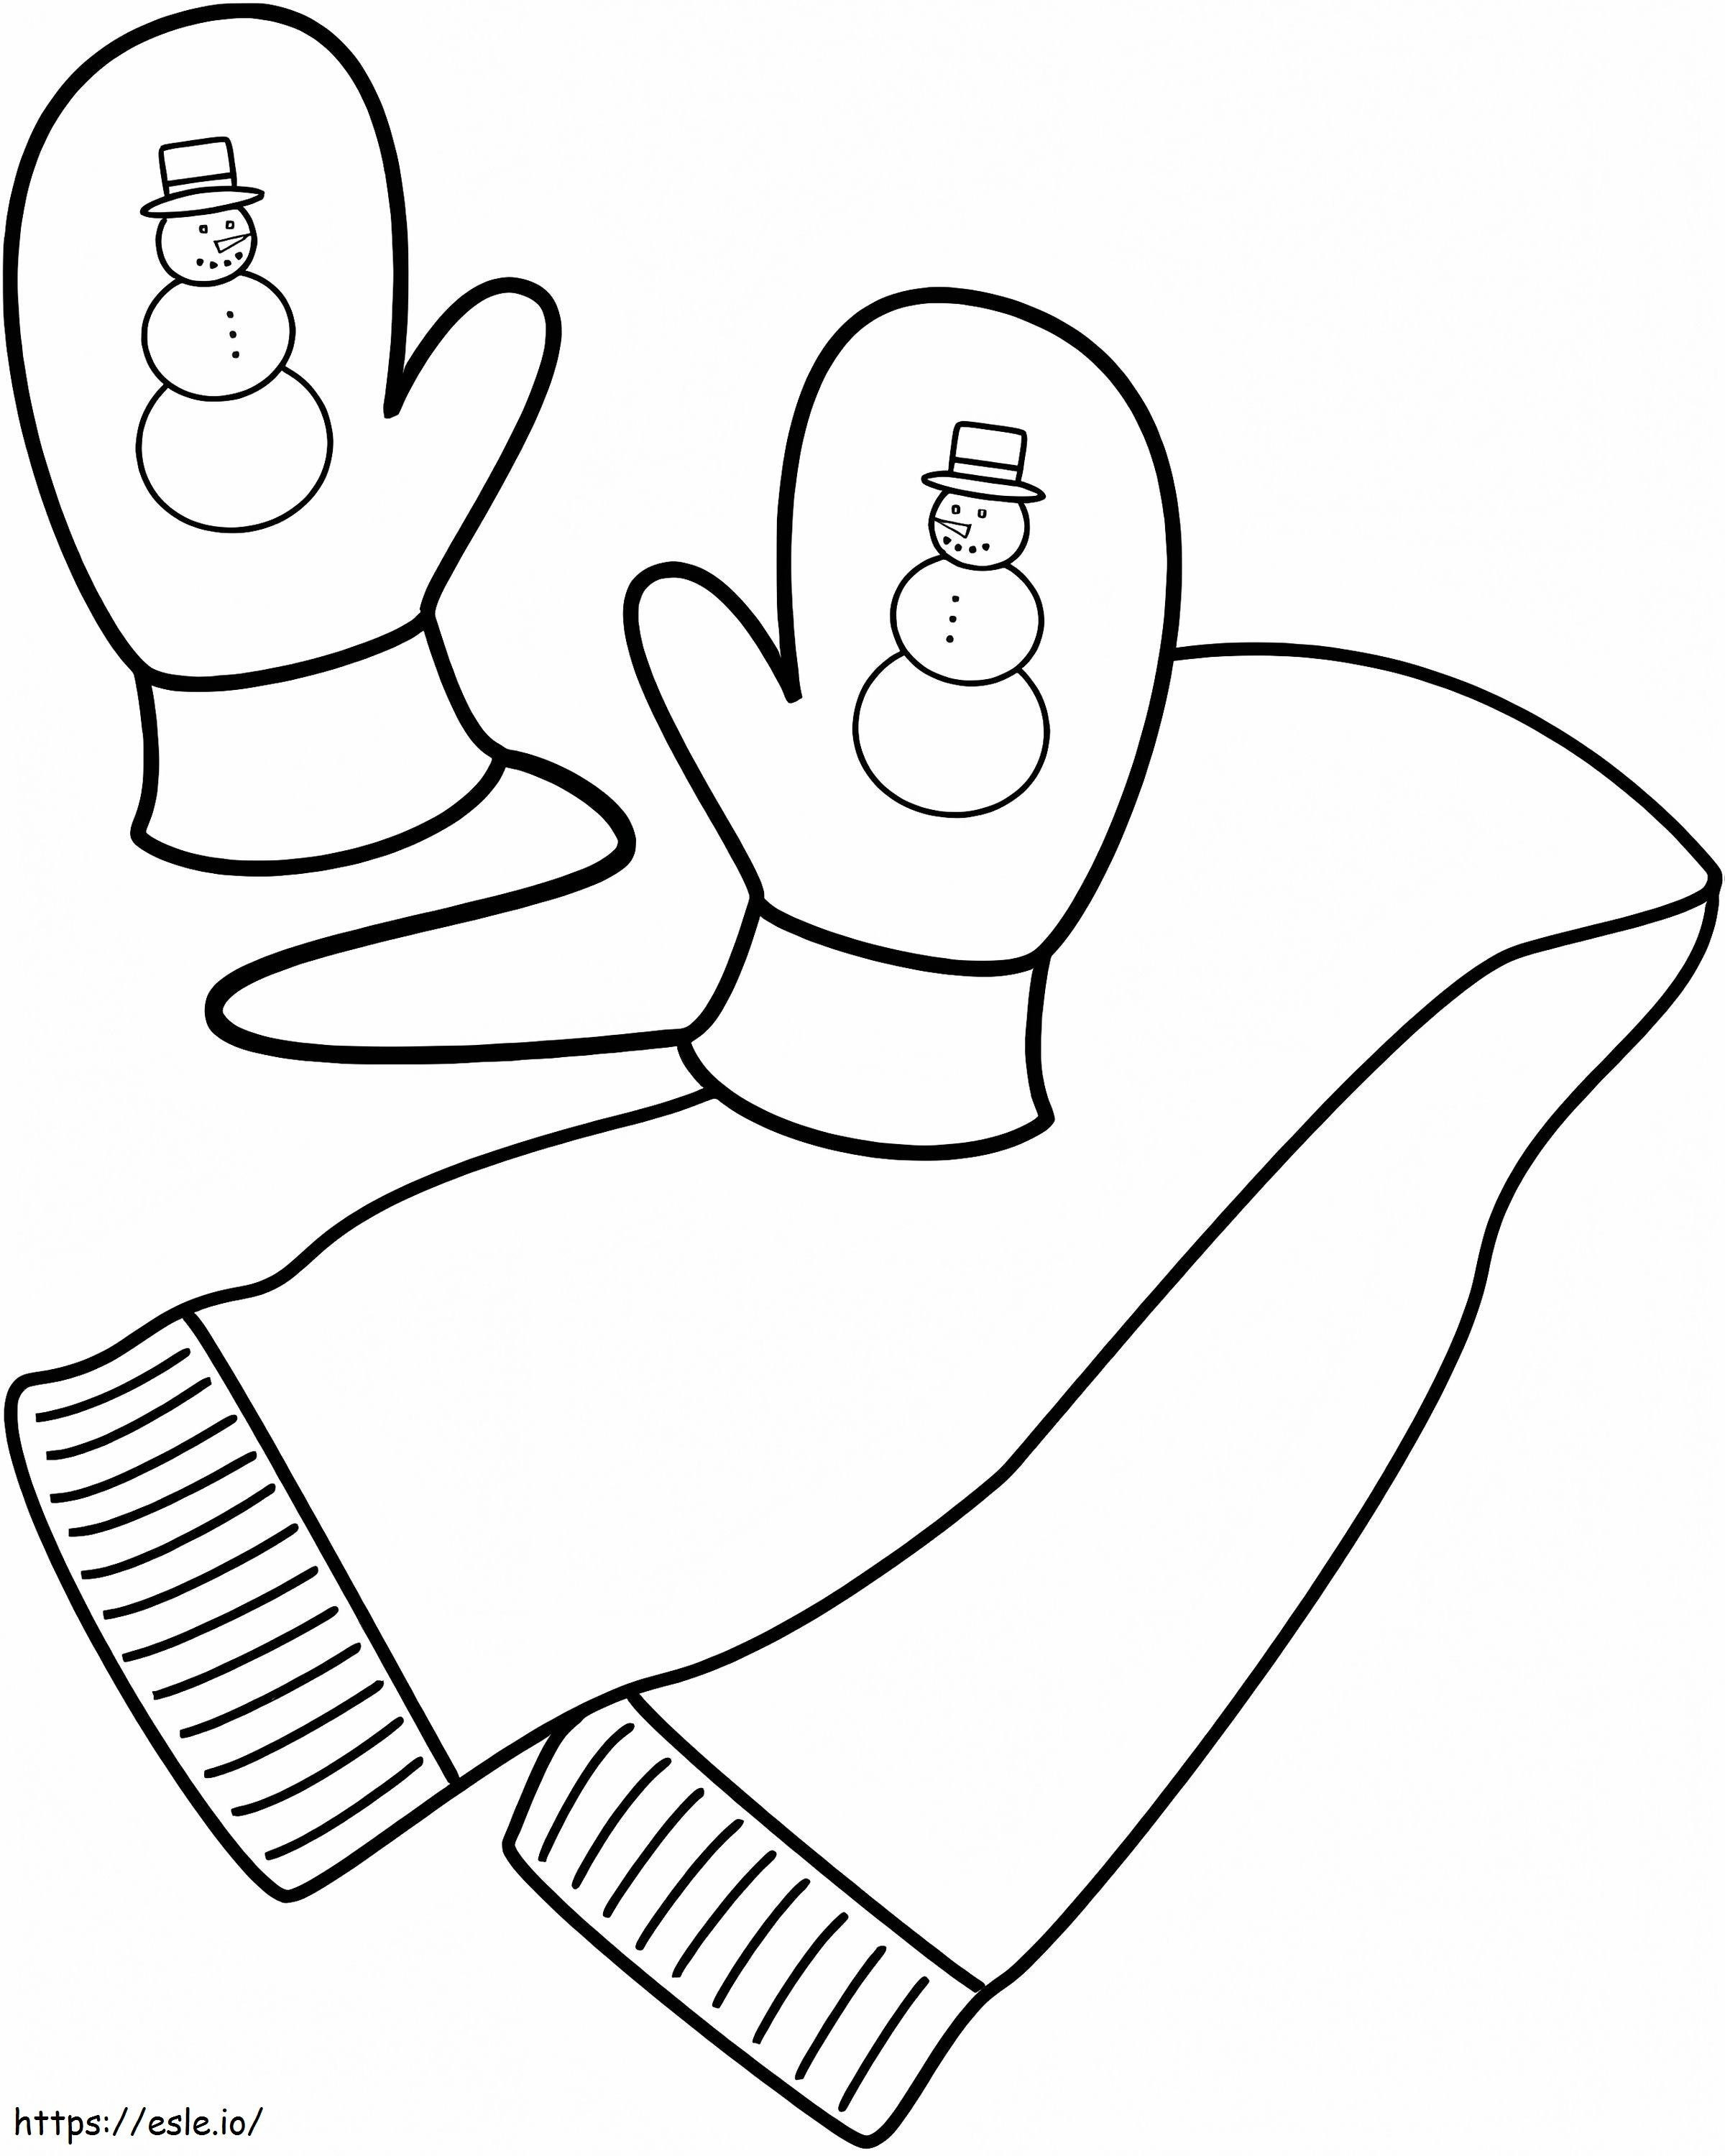 Winter Scarf And Mittens coloring page